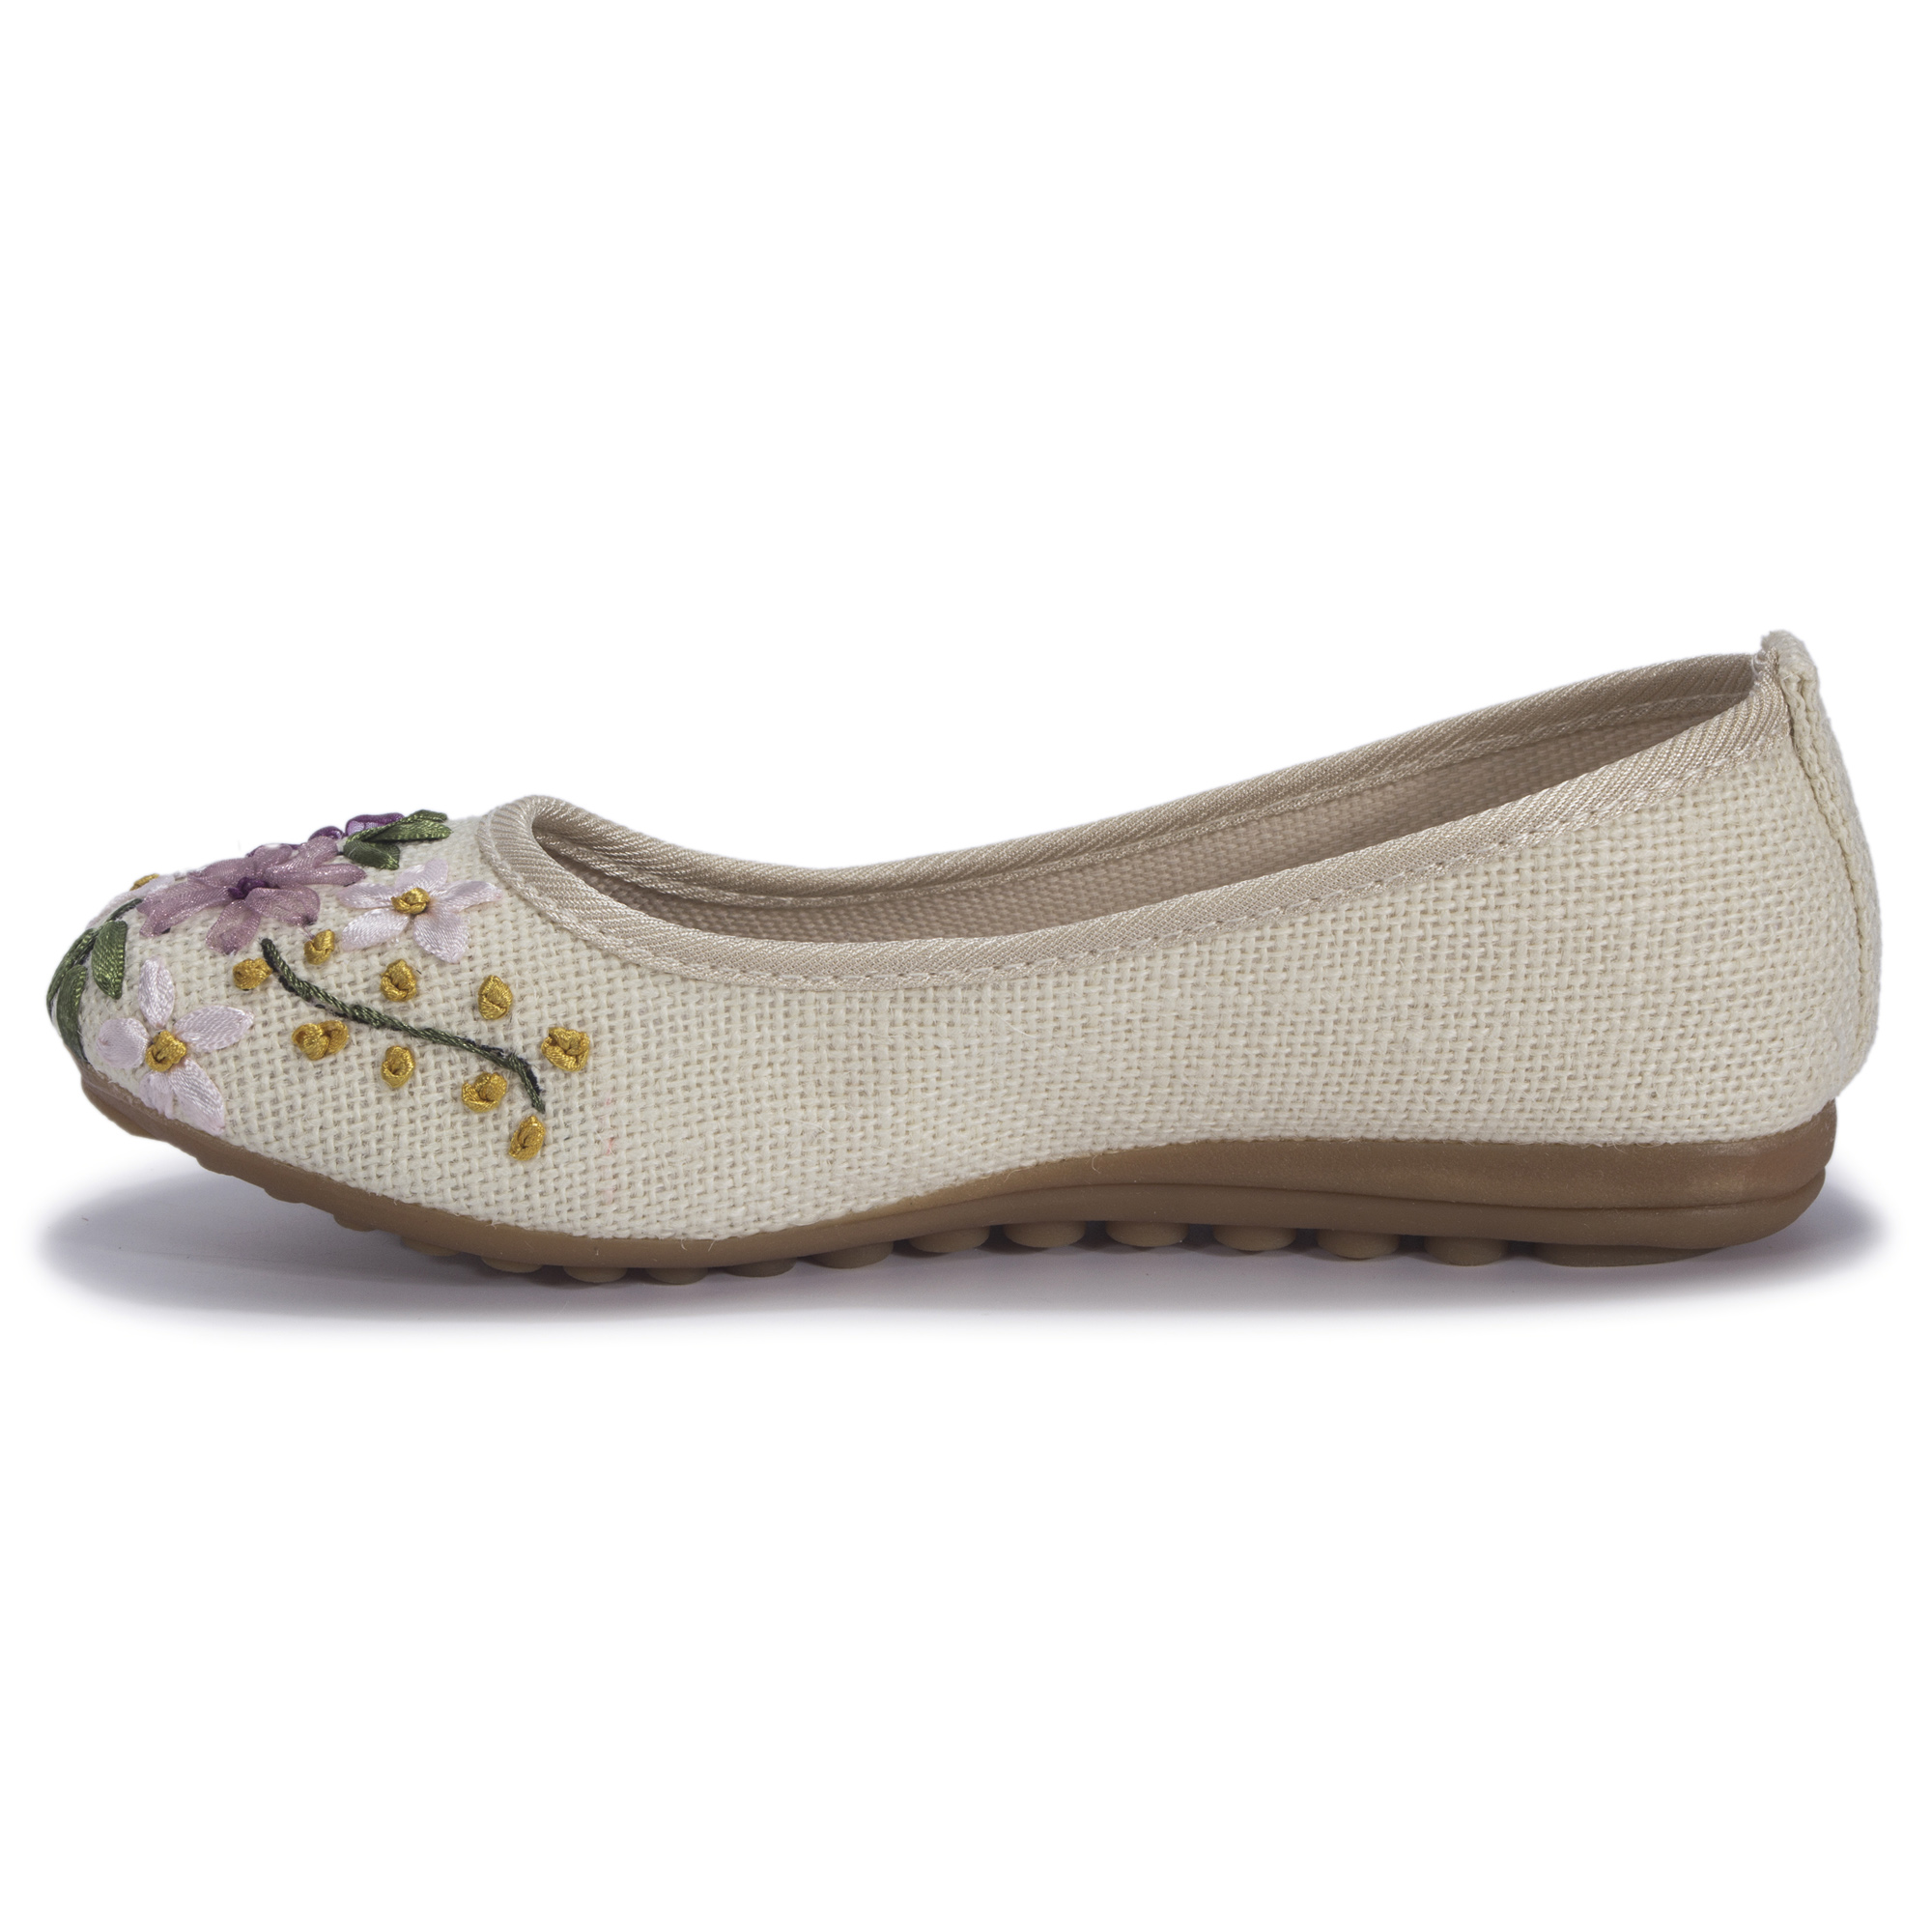 DODOING Womens Ballet Flats Floral Embroidered Cut Platform Shoe Slip On Flats Casual Driving Loafers Shoes, Khaki/ White/ Navy Blue, 4-10 Size - image 5 of 7